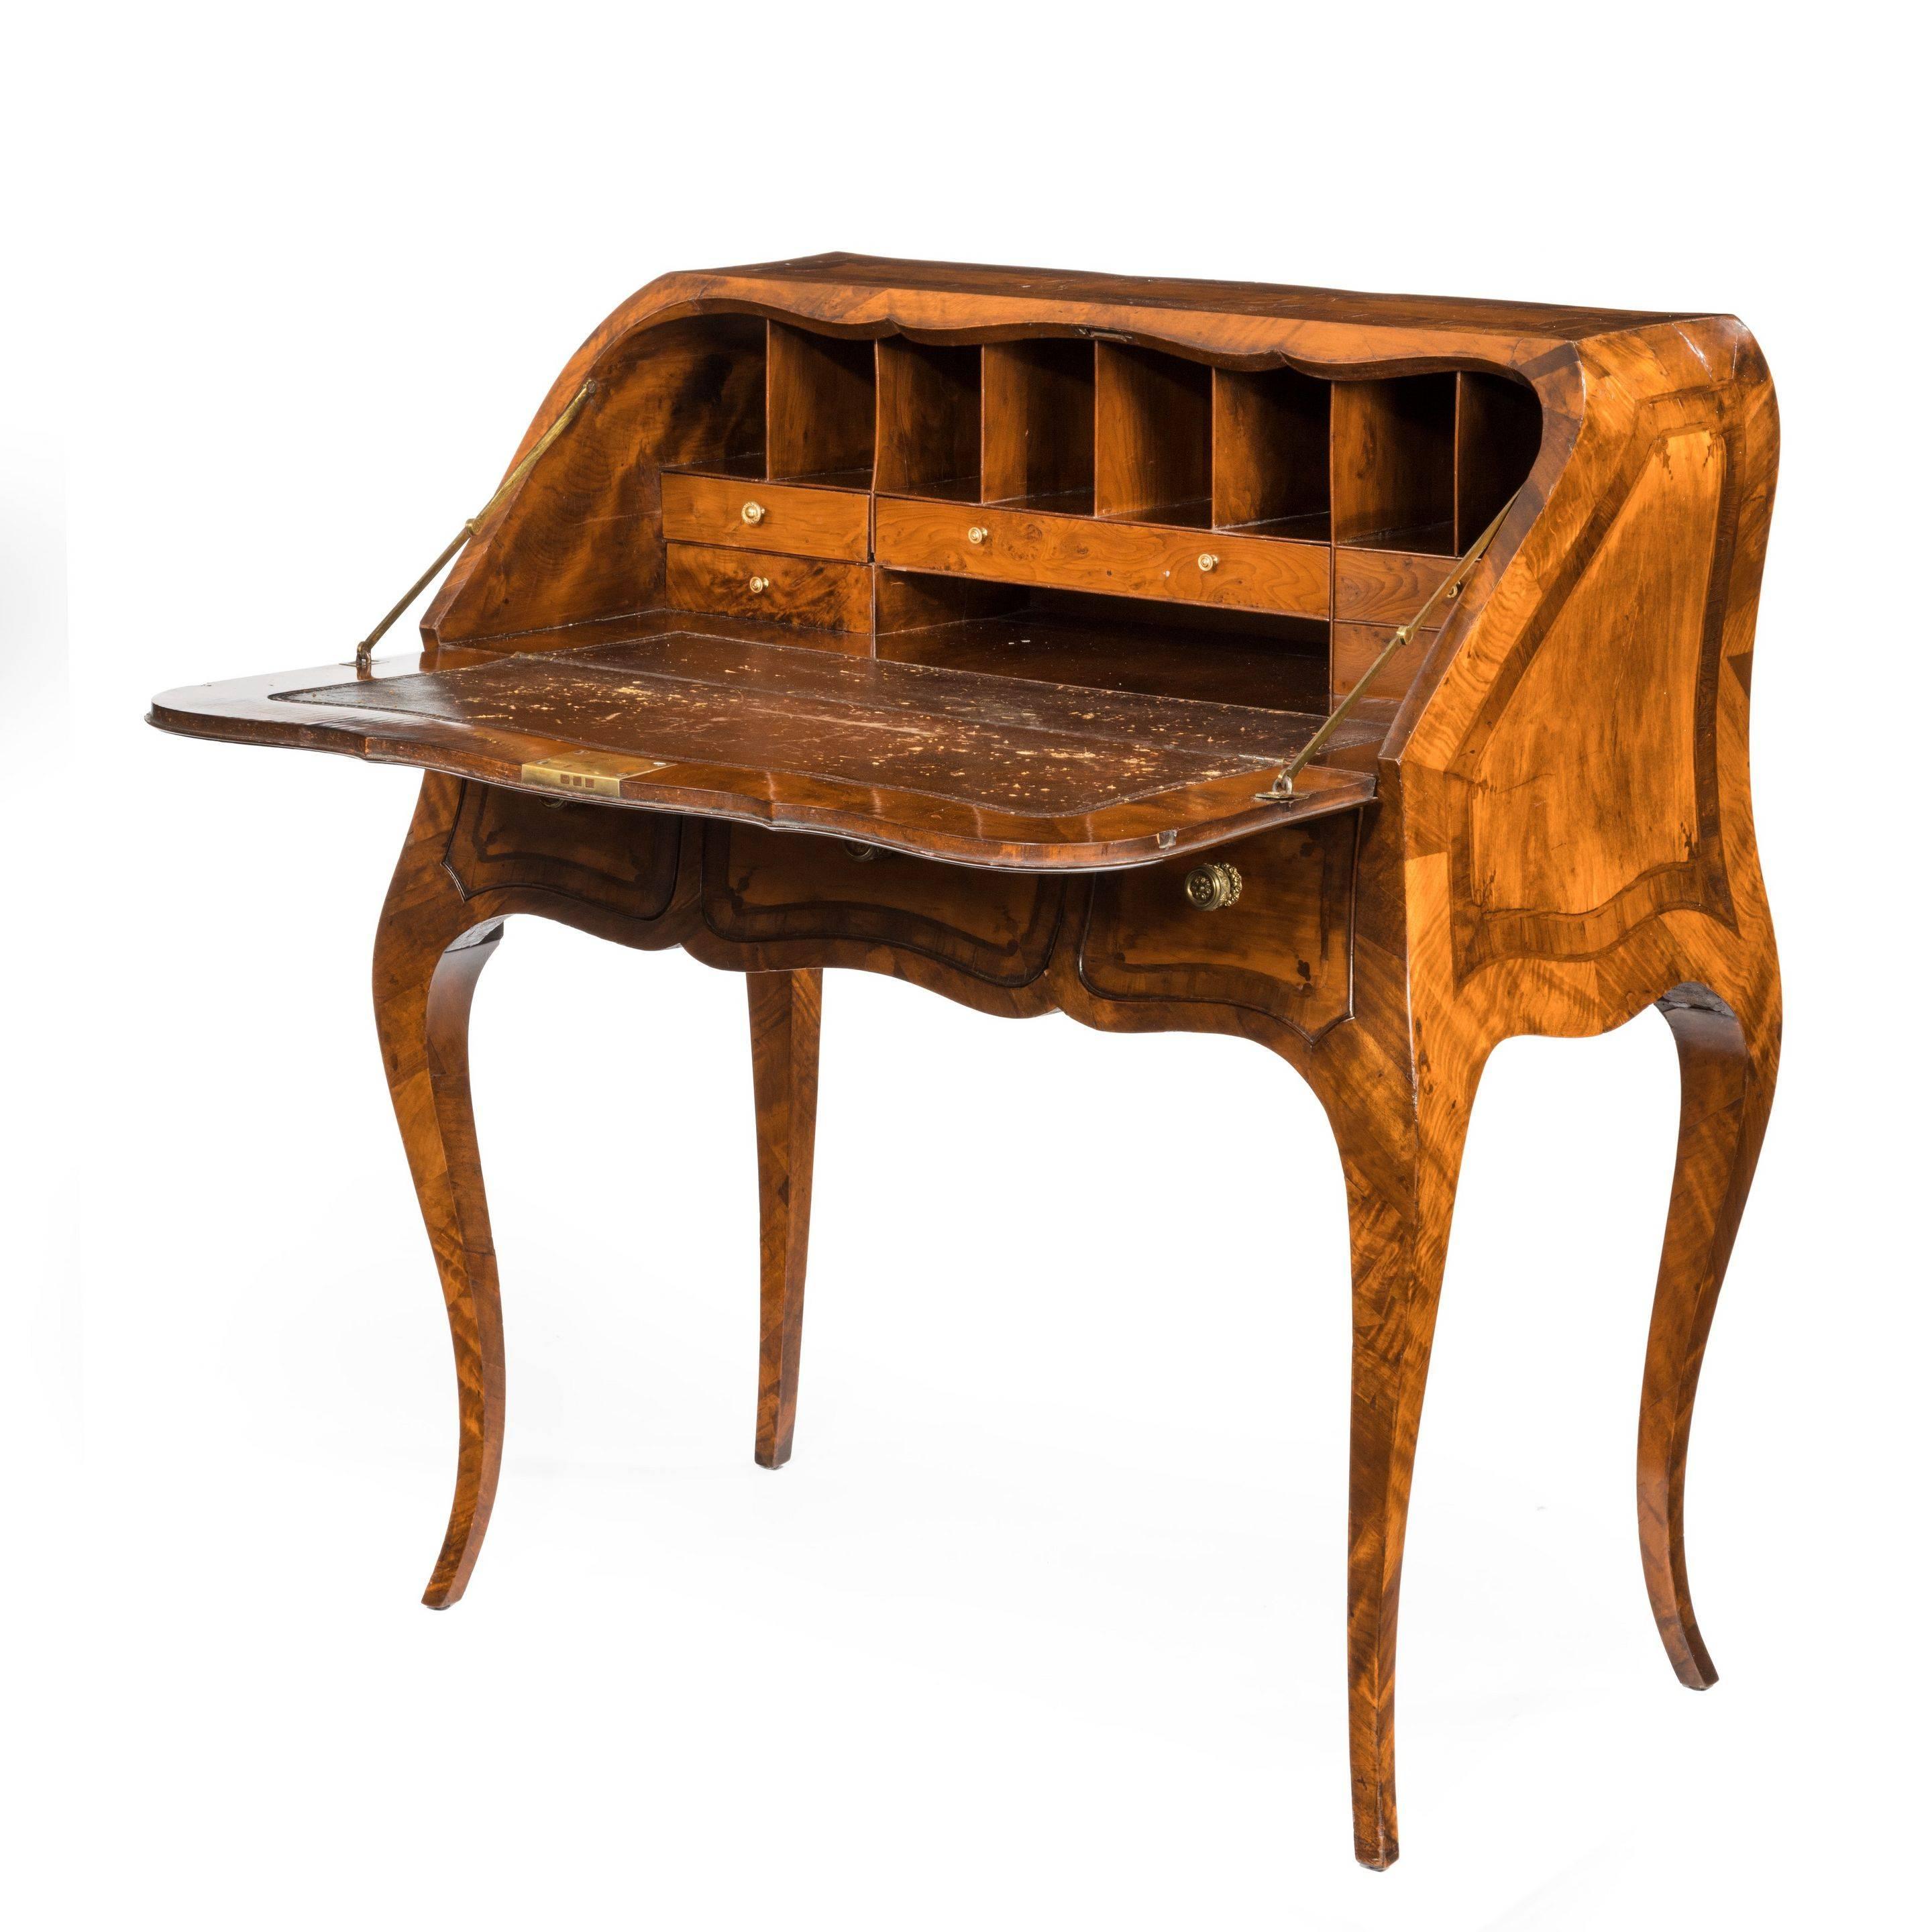 An attractive 18th century English satinwood bureau in French taste, the
shaped top with bombé sides and a fall front opening to reveal pigeon holes,
one long and four short drawers and the original leather, all above three
frieze drawers, set on